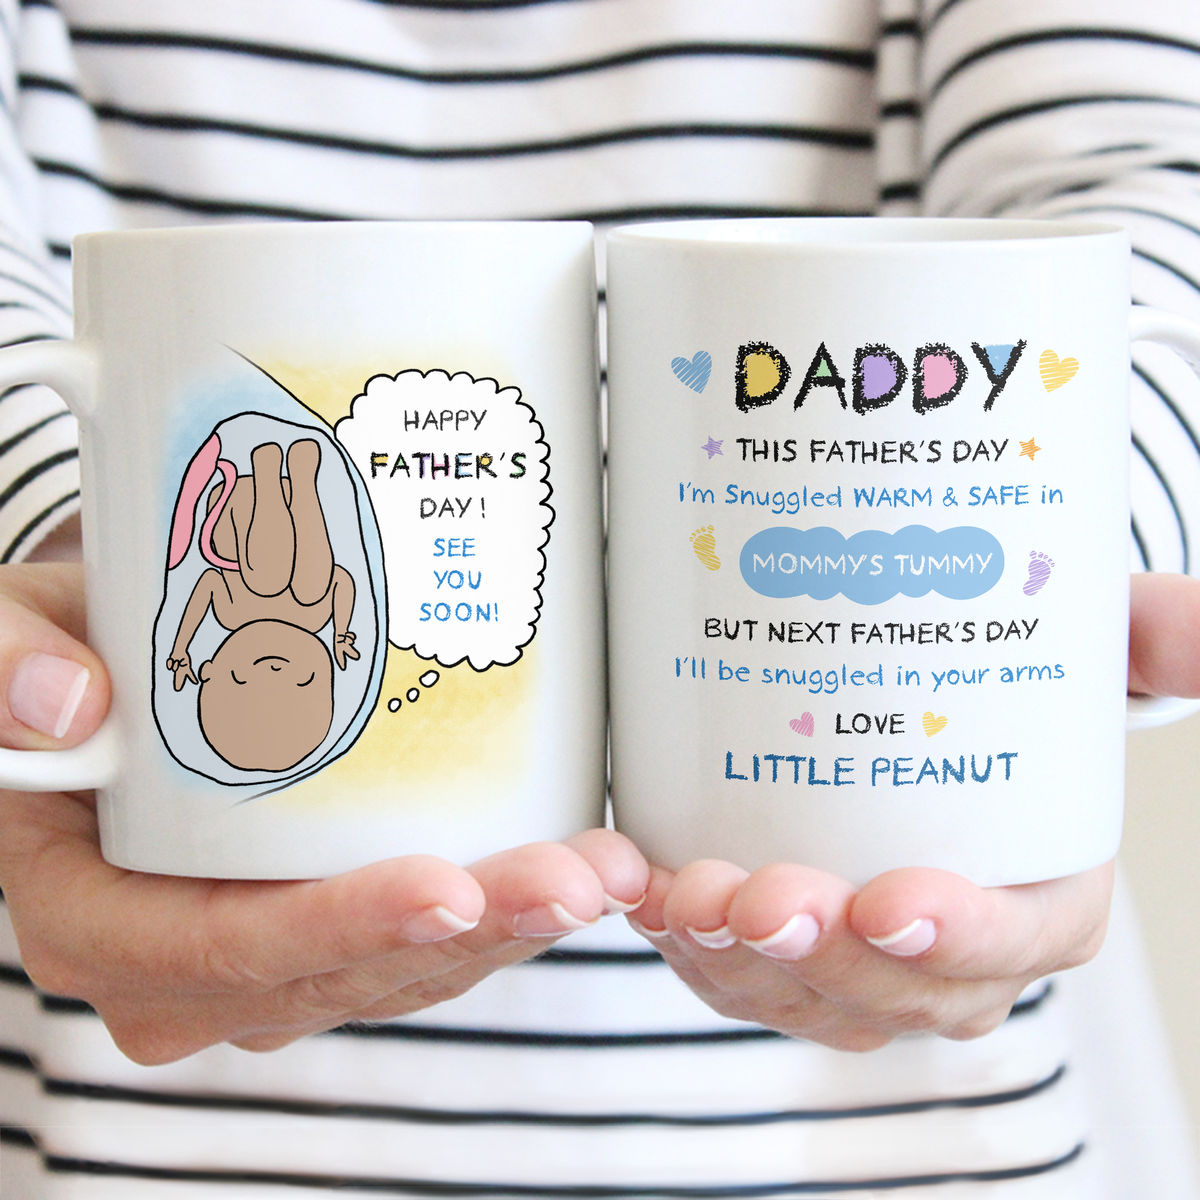 Happy Father's day - From Baby Bump - Daddy, This Father's Day I'm Snuggled Warm & Safe In Mommy's Tummy. But next Father's Day, I'll be Snuggled in your arms - Ver 2024 - Personalized Mug_2